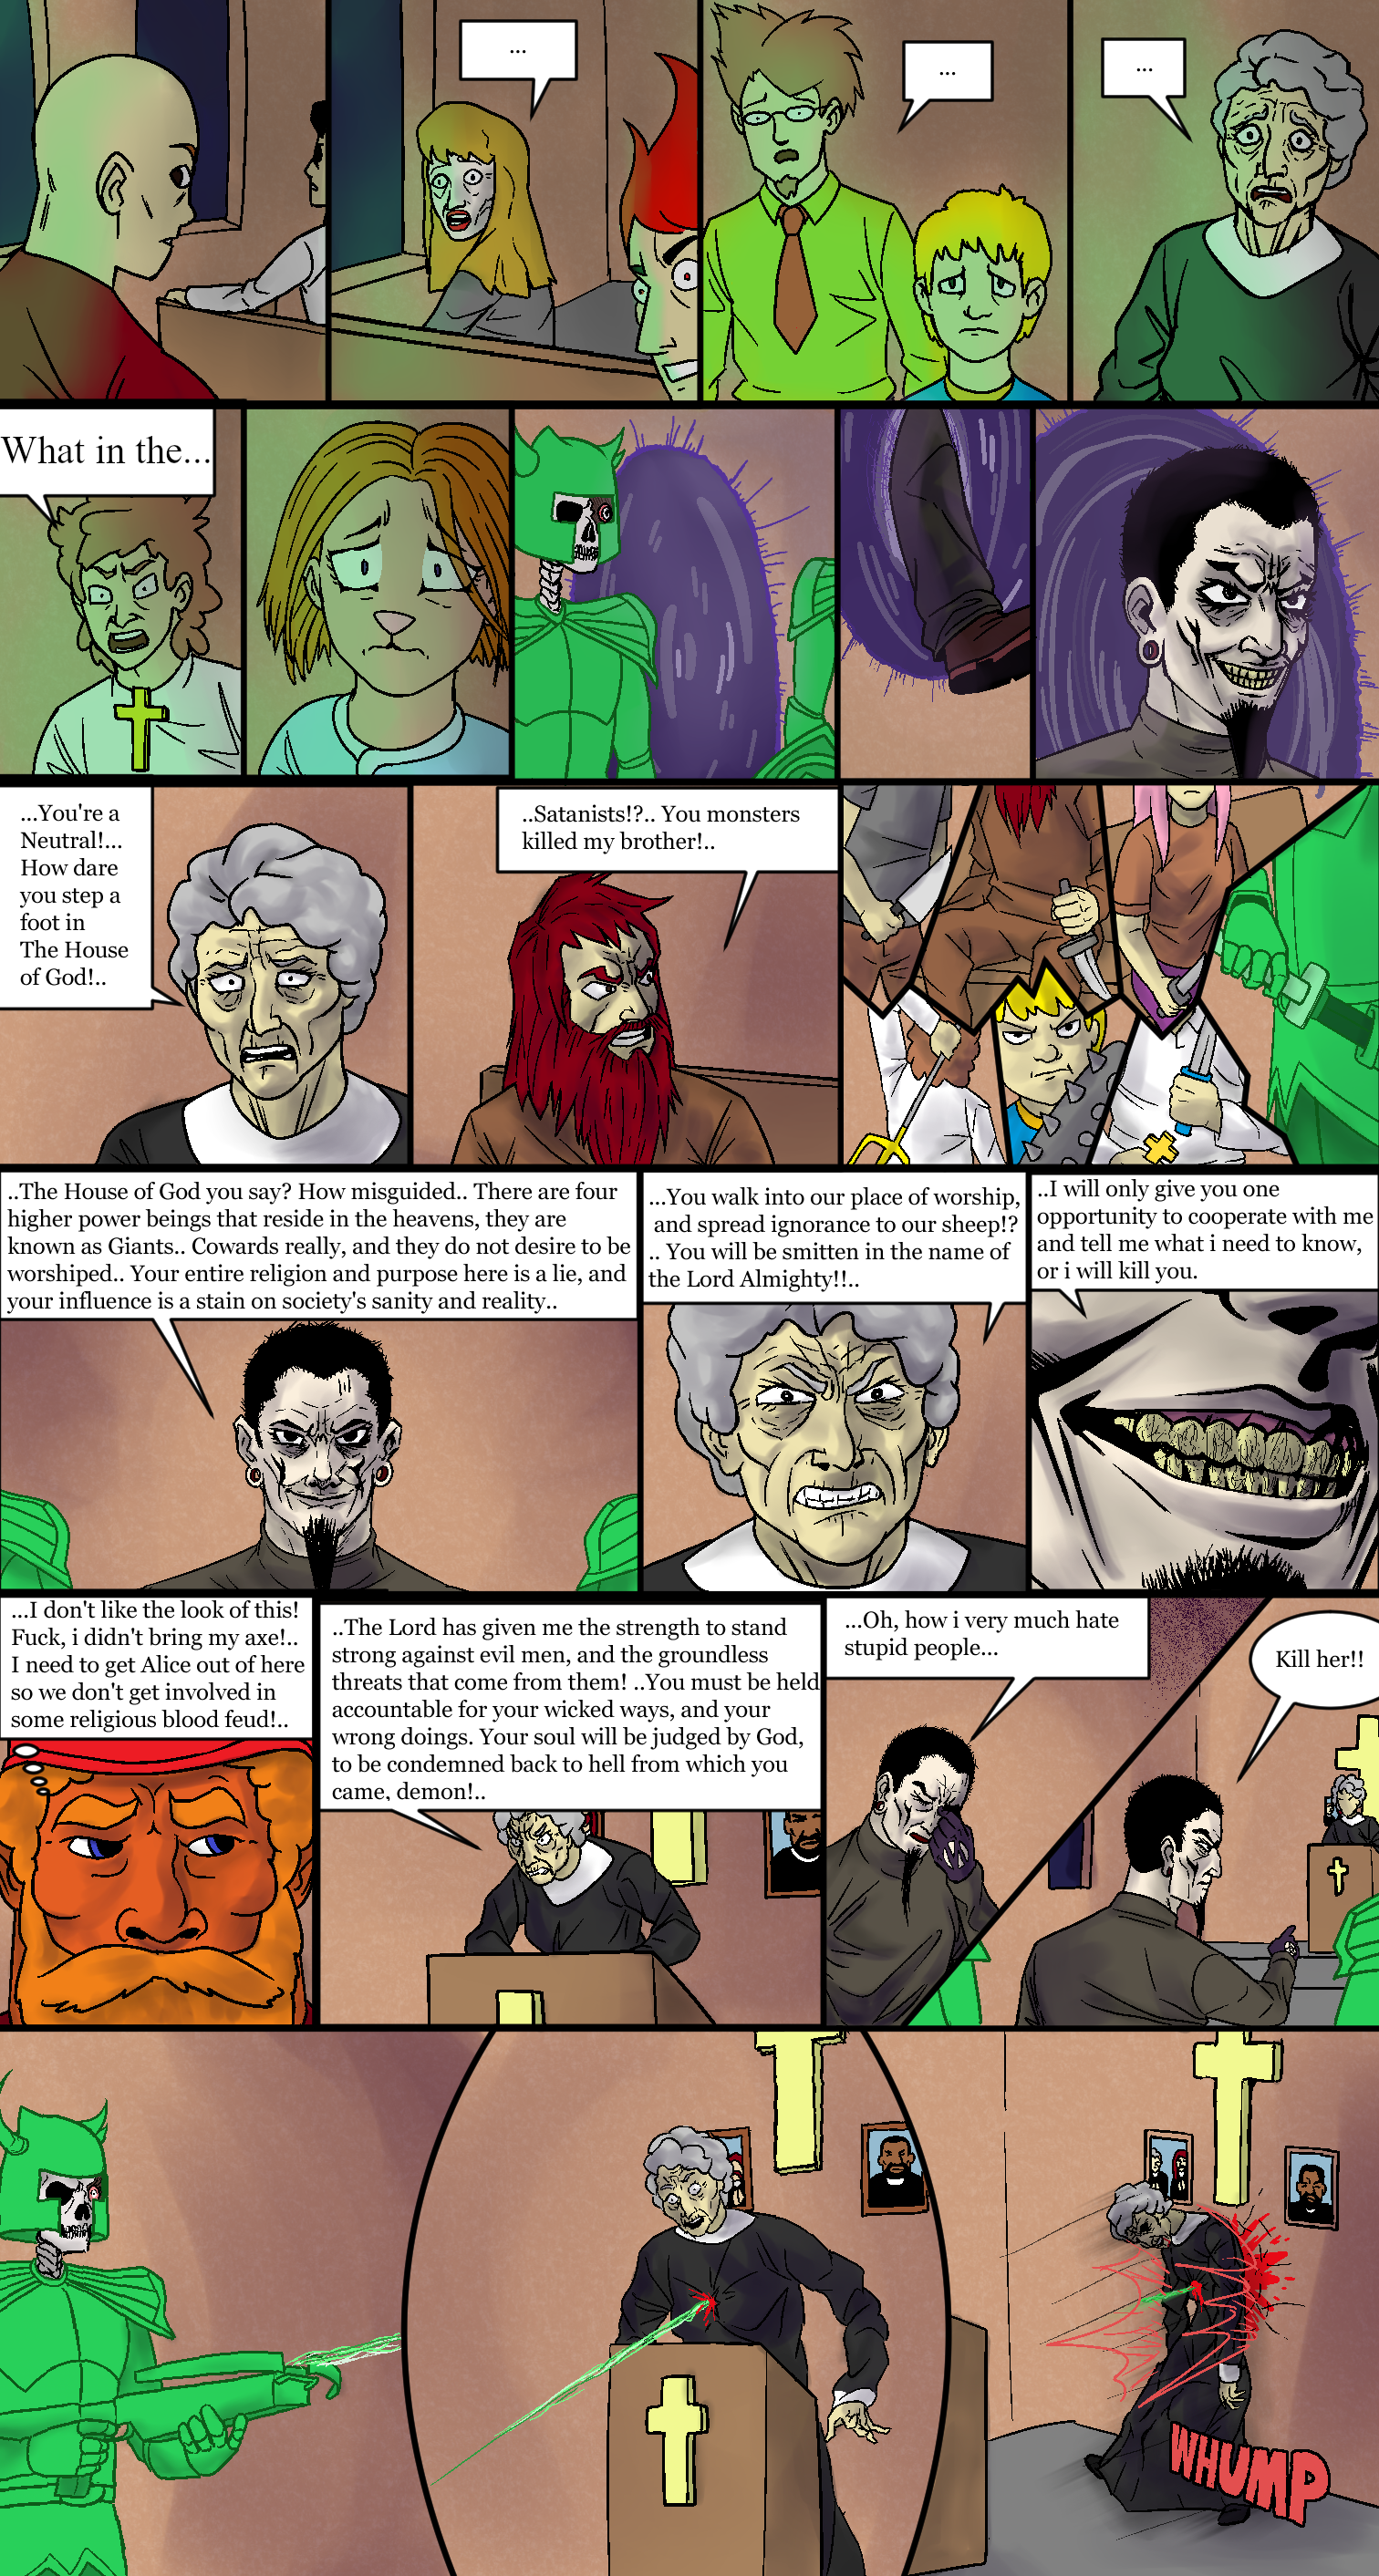 ch25.5/pg2.png. If you're seeing this, enable images. Or, perhaps we have a website issue. Try refreshing, if unsuccessful email commodorian@tailsgetstrolled.org with a detailed description of how you got here.